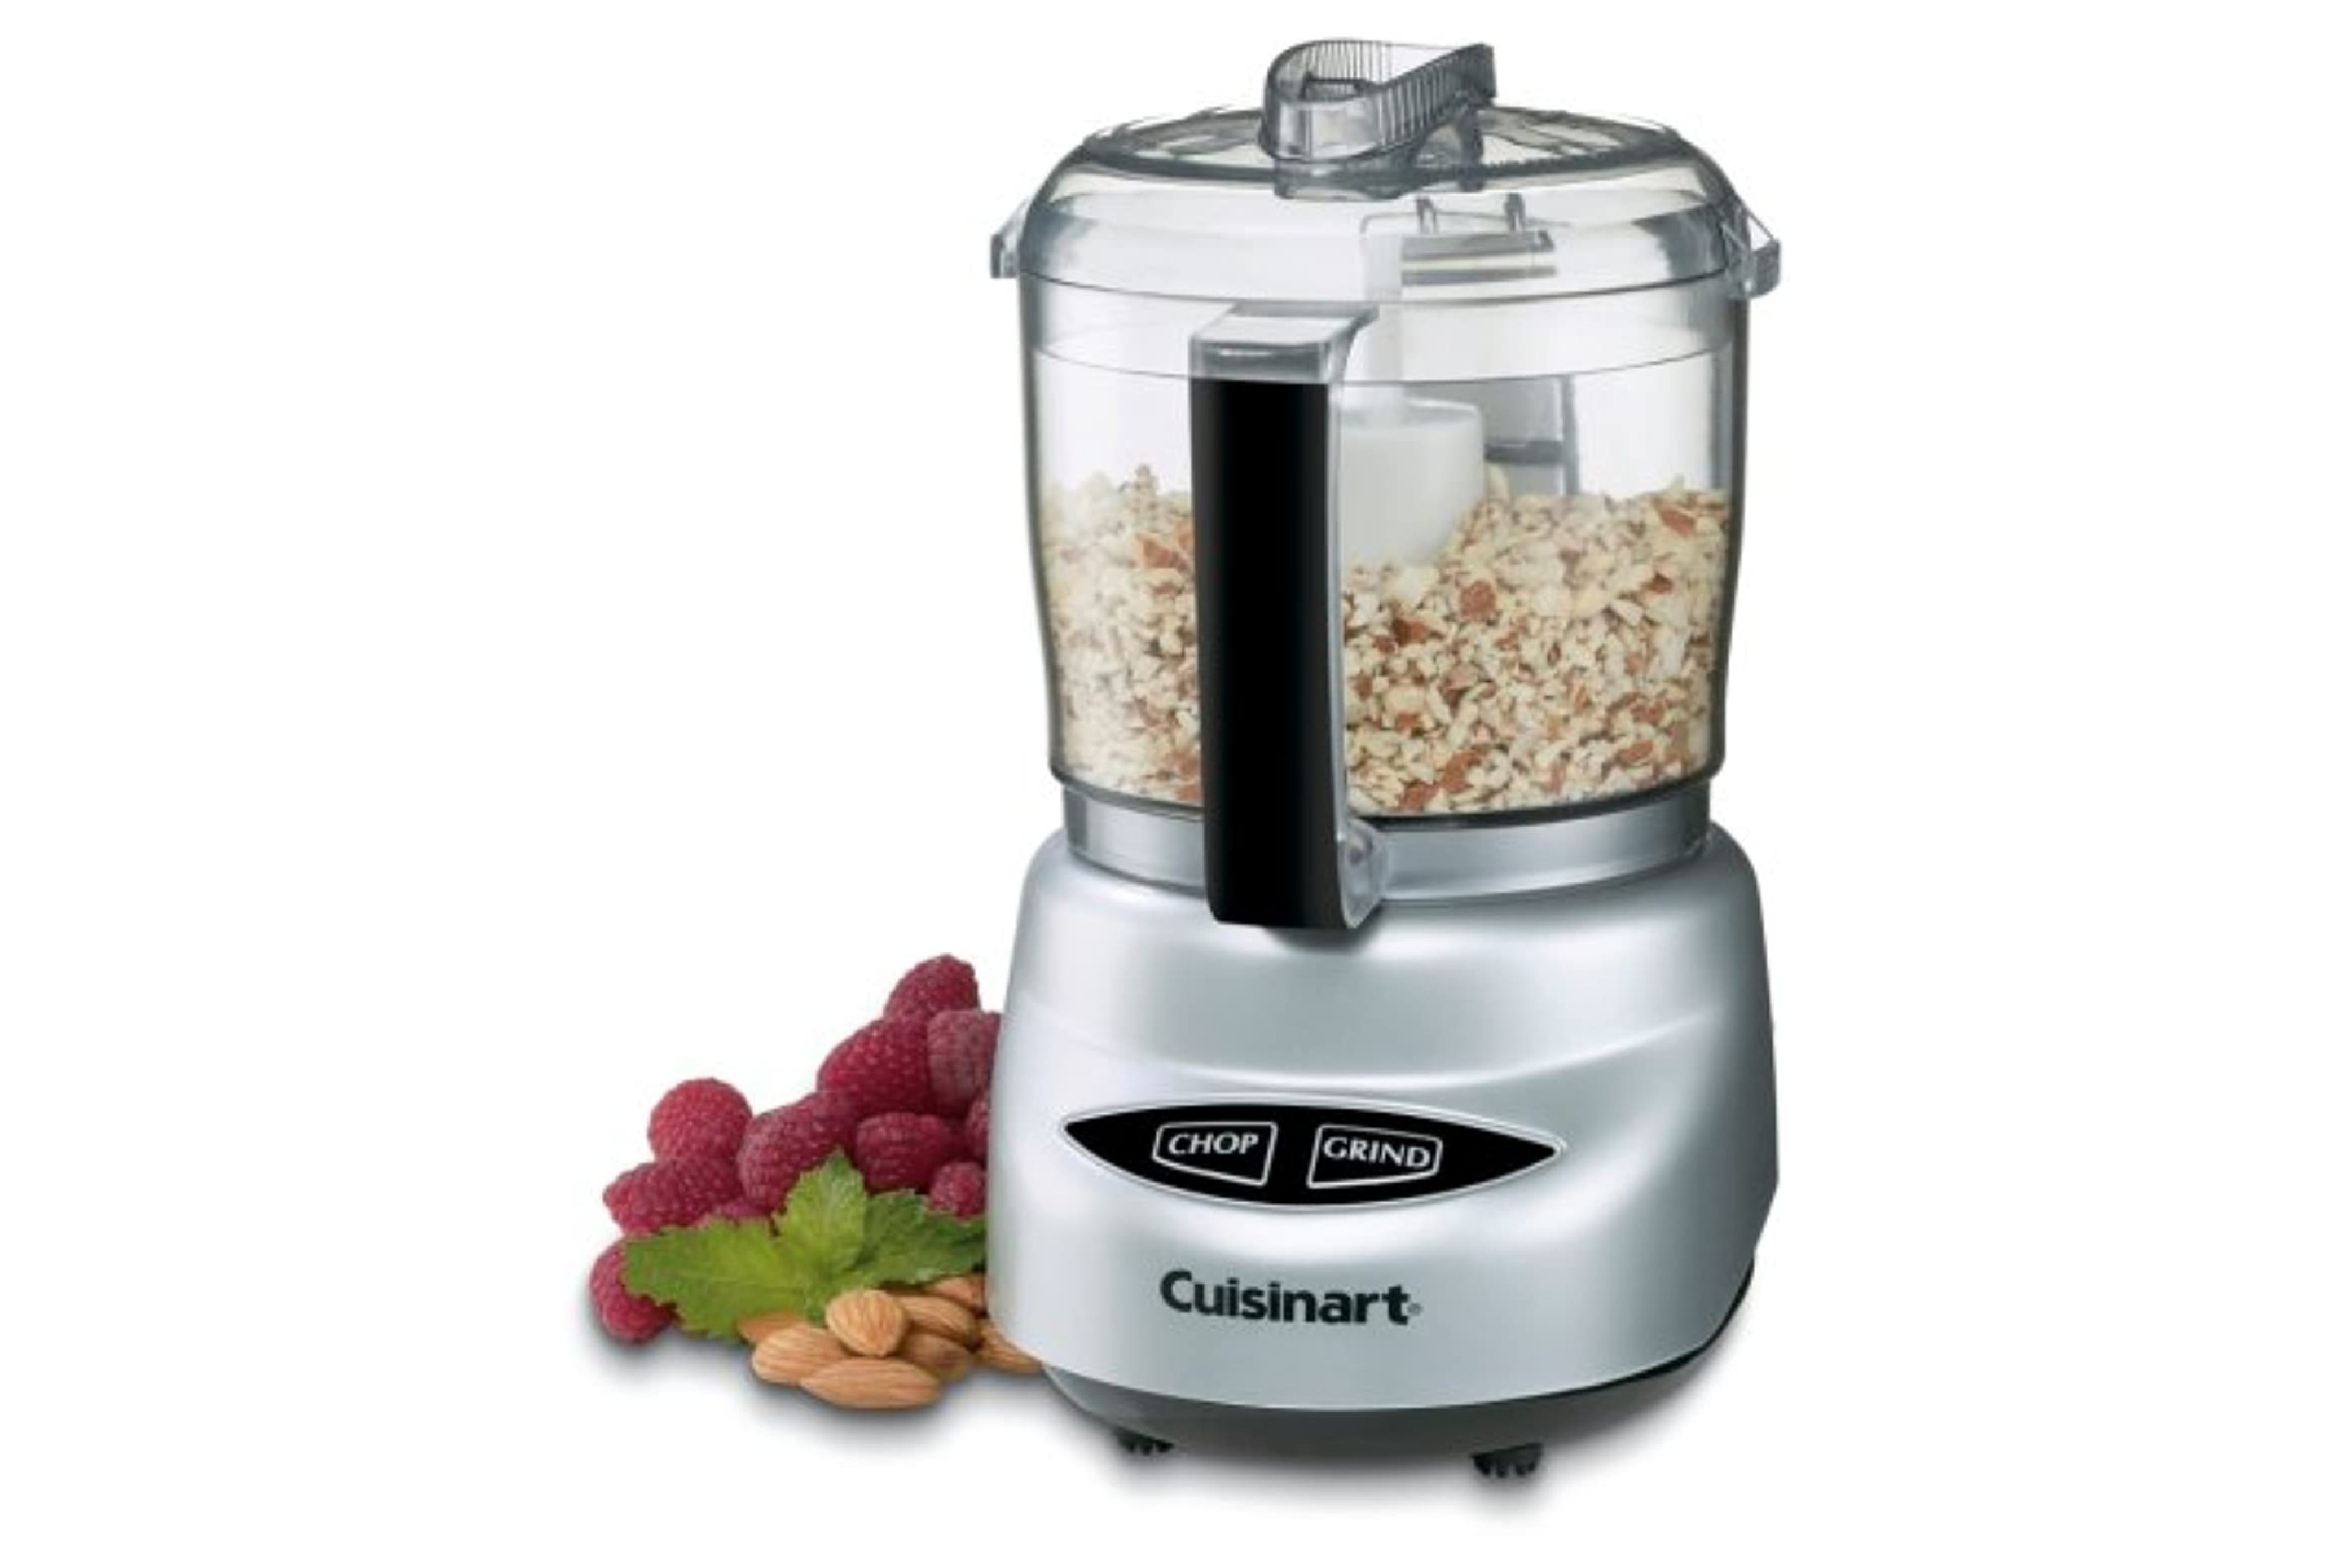 Mini food processors are a must-have tool for kitchens of all sizes